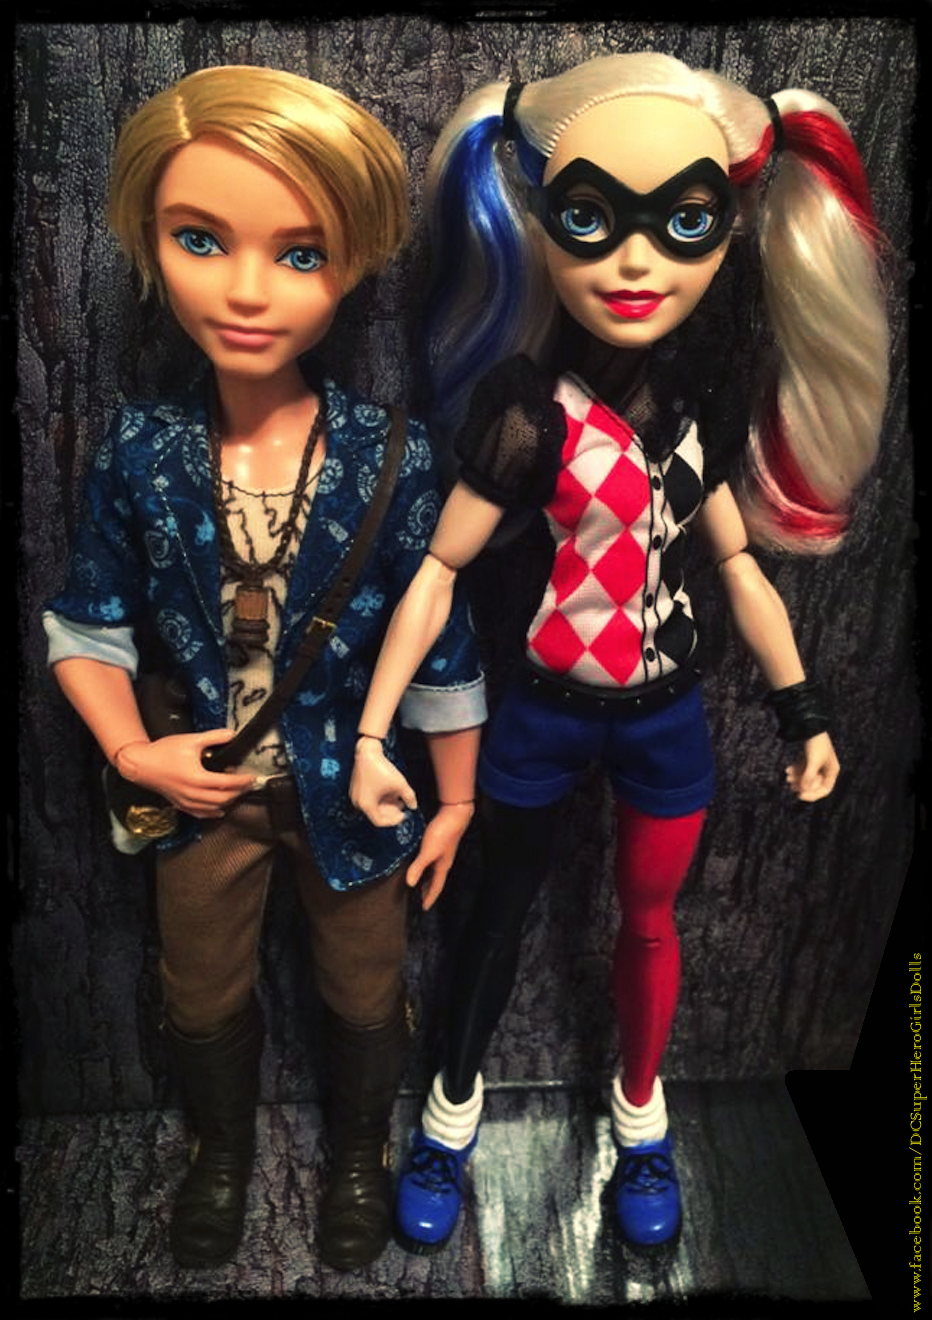 Harley Quinn™: &ldquo;Hiya shortie!&rdquo;As requested, here&rsquo;s a height comparison between the average DC Super Hero Girls doll and the average Ever After High boy doll! Not much difference, but still Harley is slightly taller than Alistair Wonderland™.